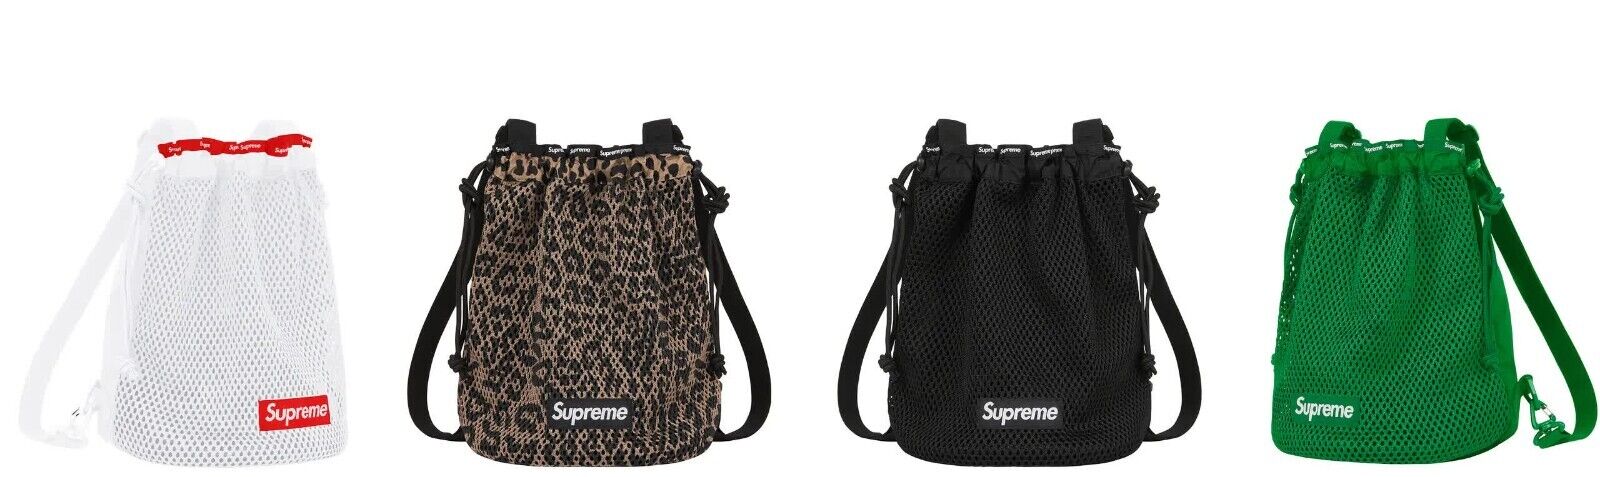 Supreme Mesh Small Backpack 10L 23SS 4colors Black White Green Leopard  Brand New